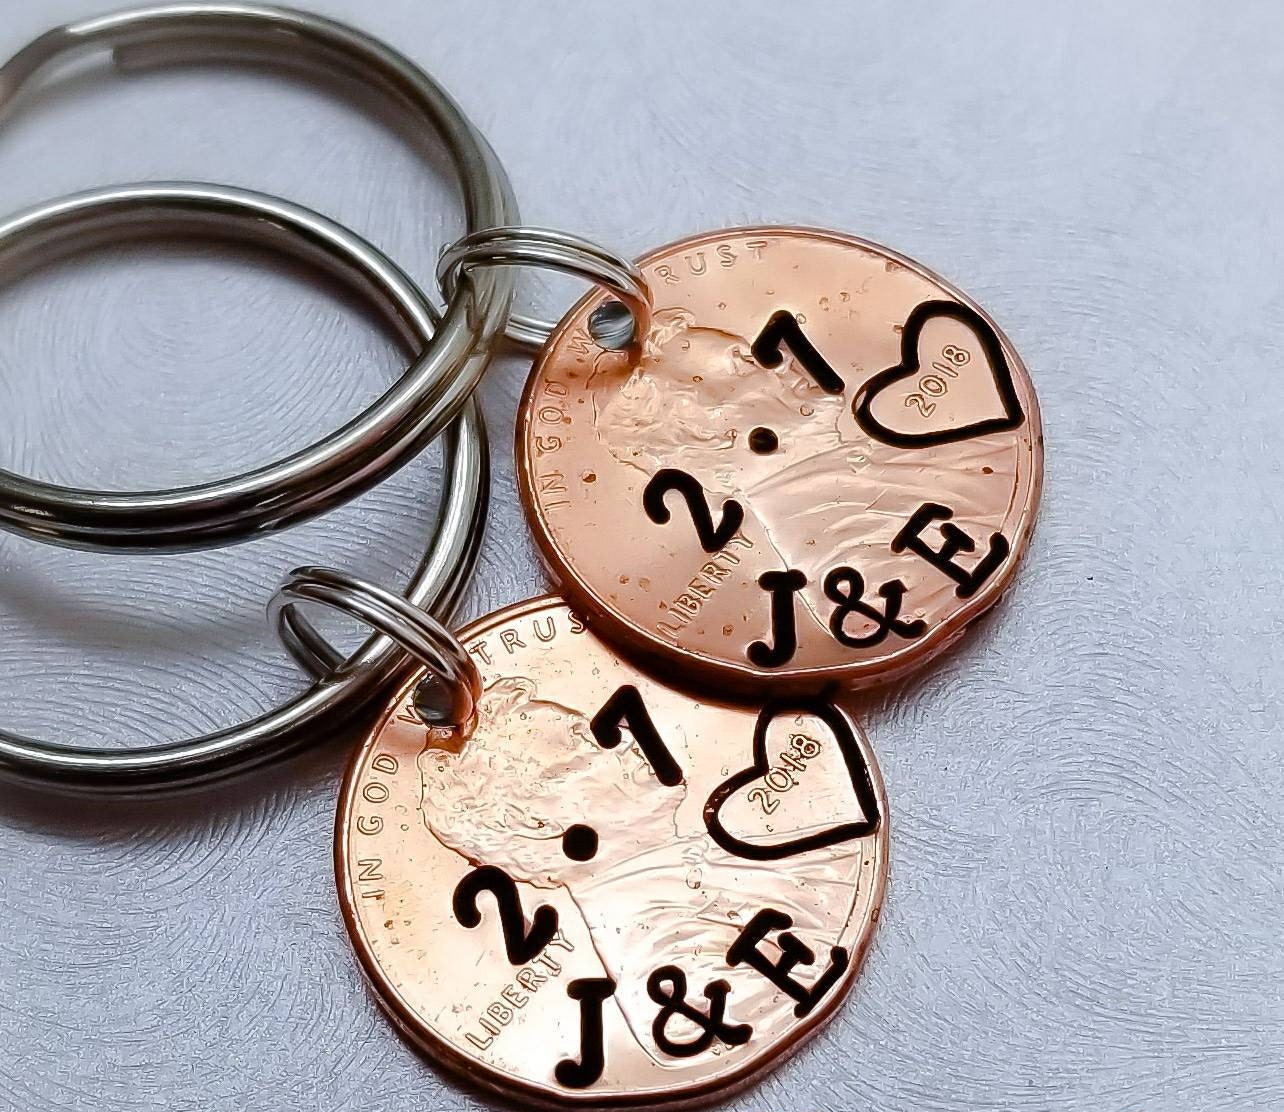 Pair of two Personalized Anniversary Penny Keychains customized with Initials and date